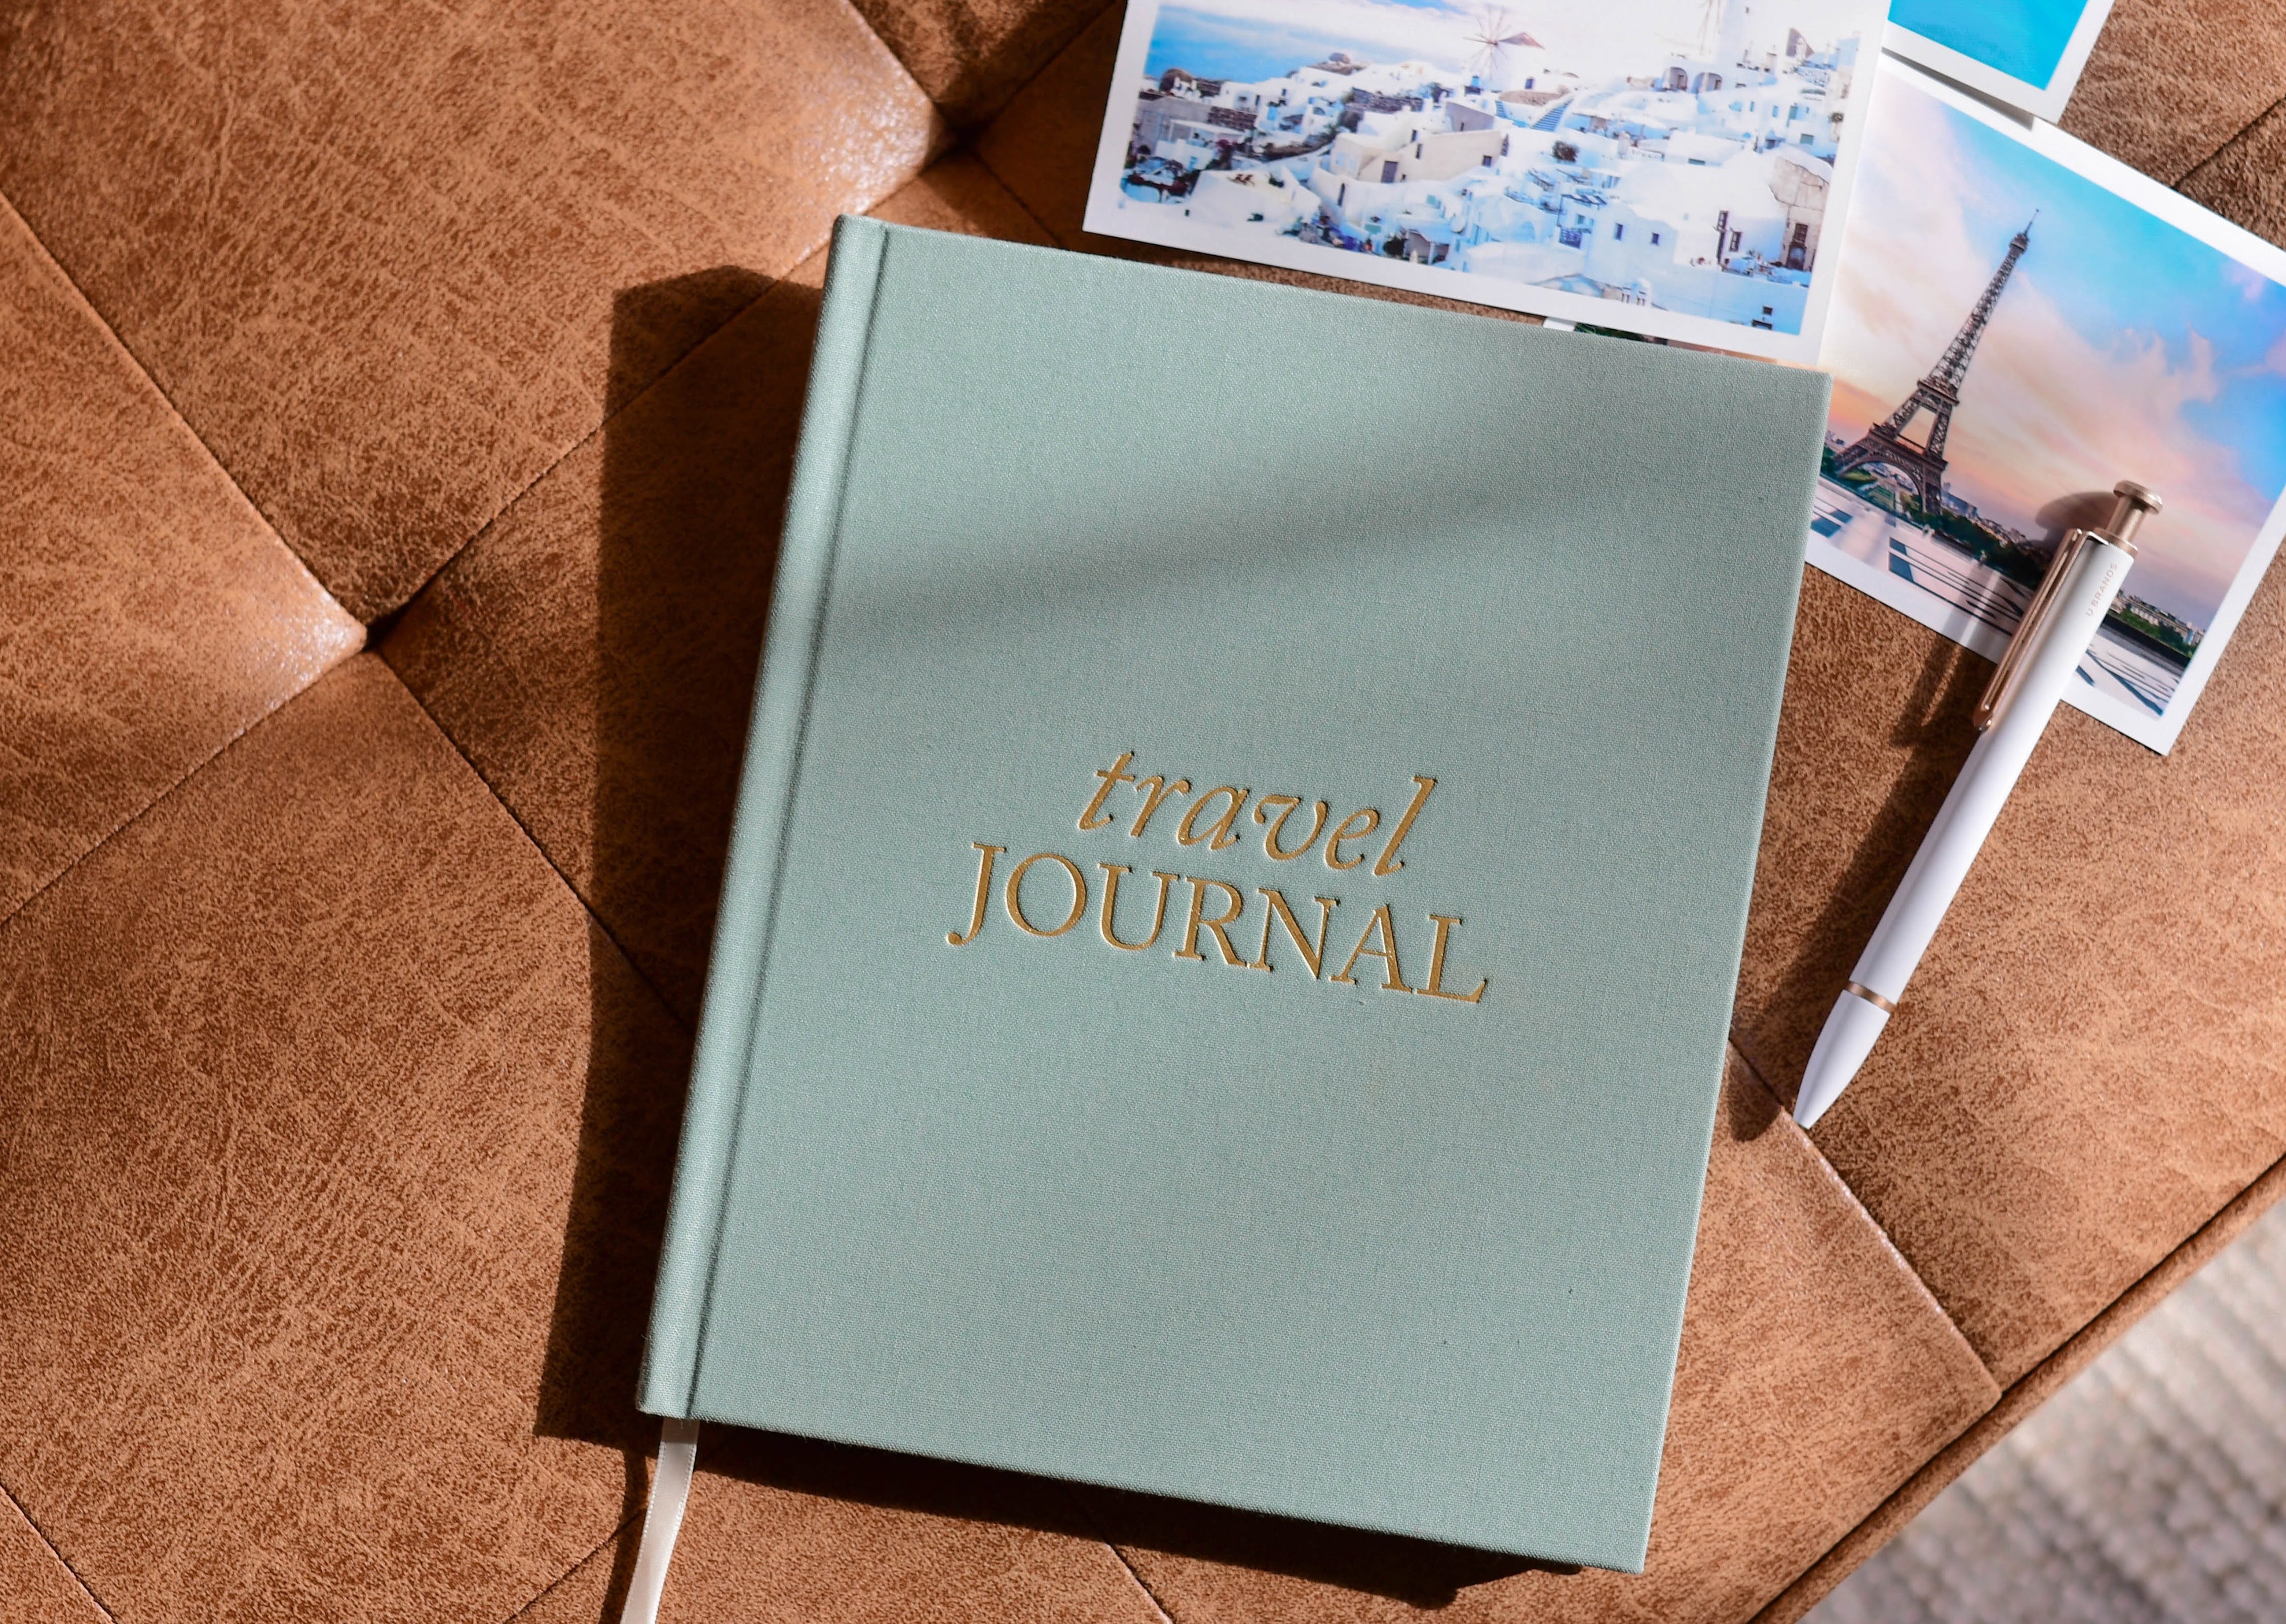 100 Travel Journal Ideas & Prompts For Any Adventure